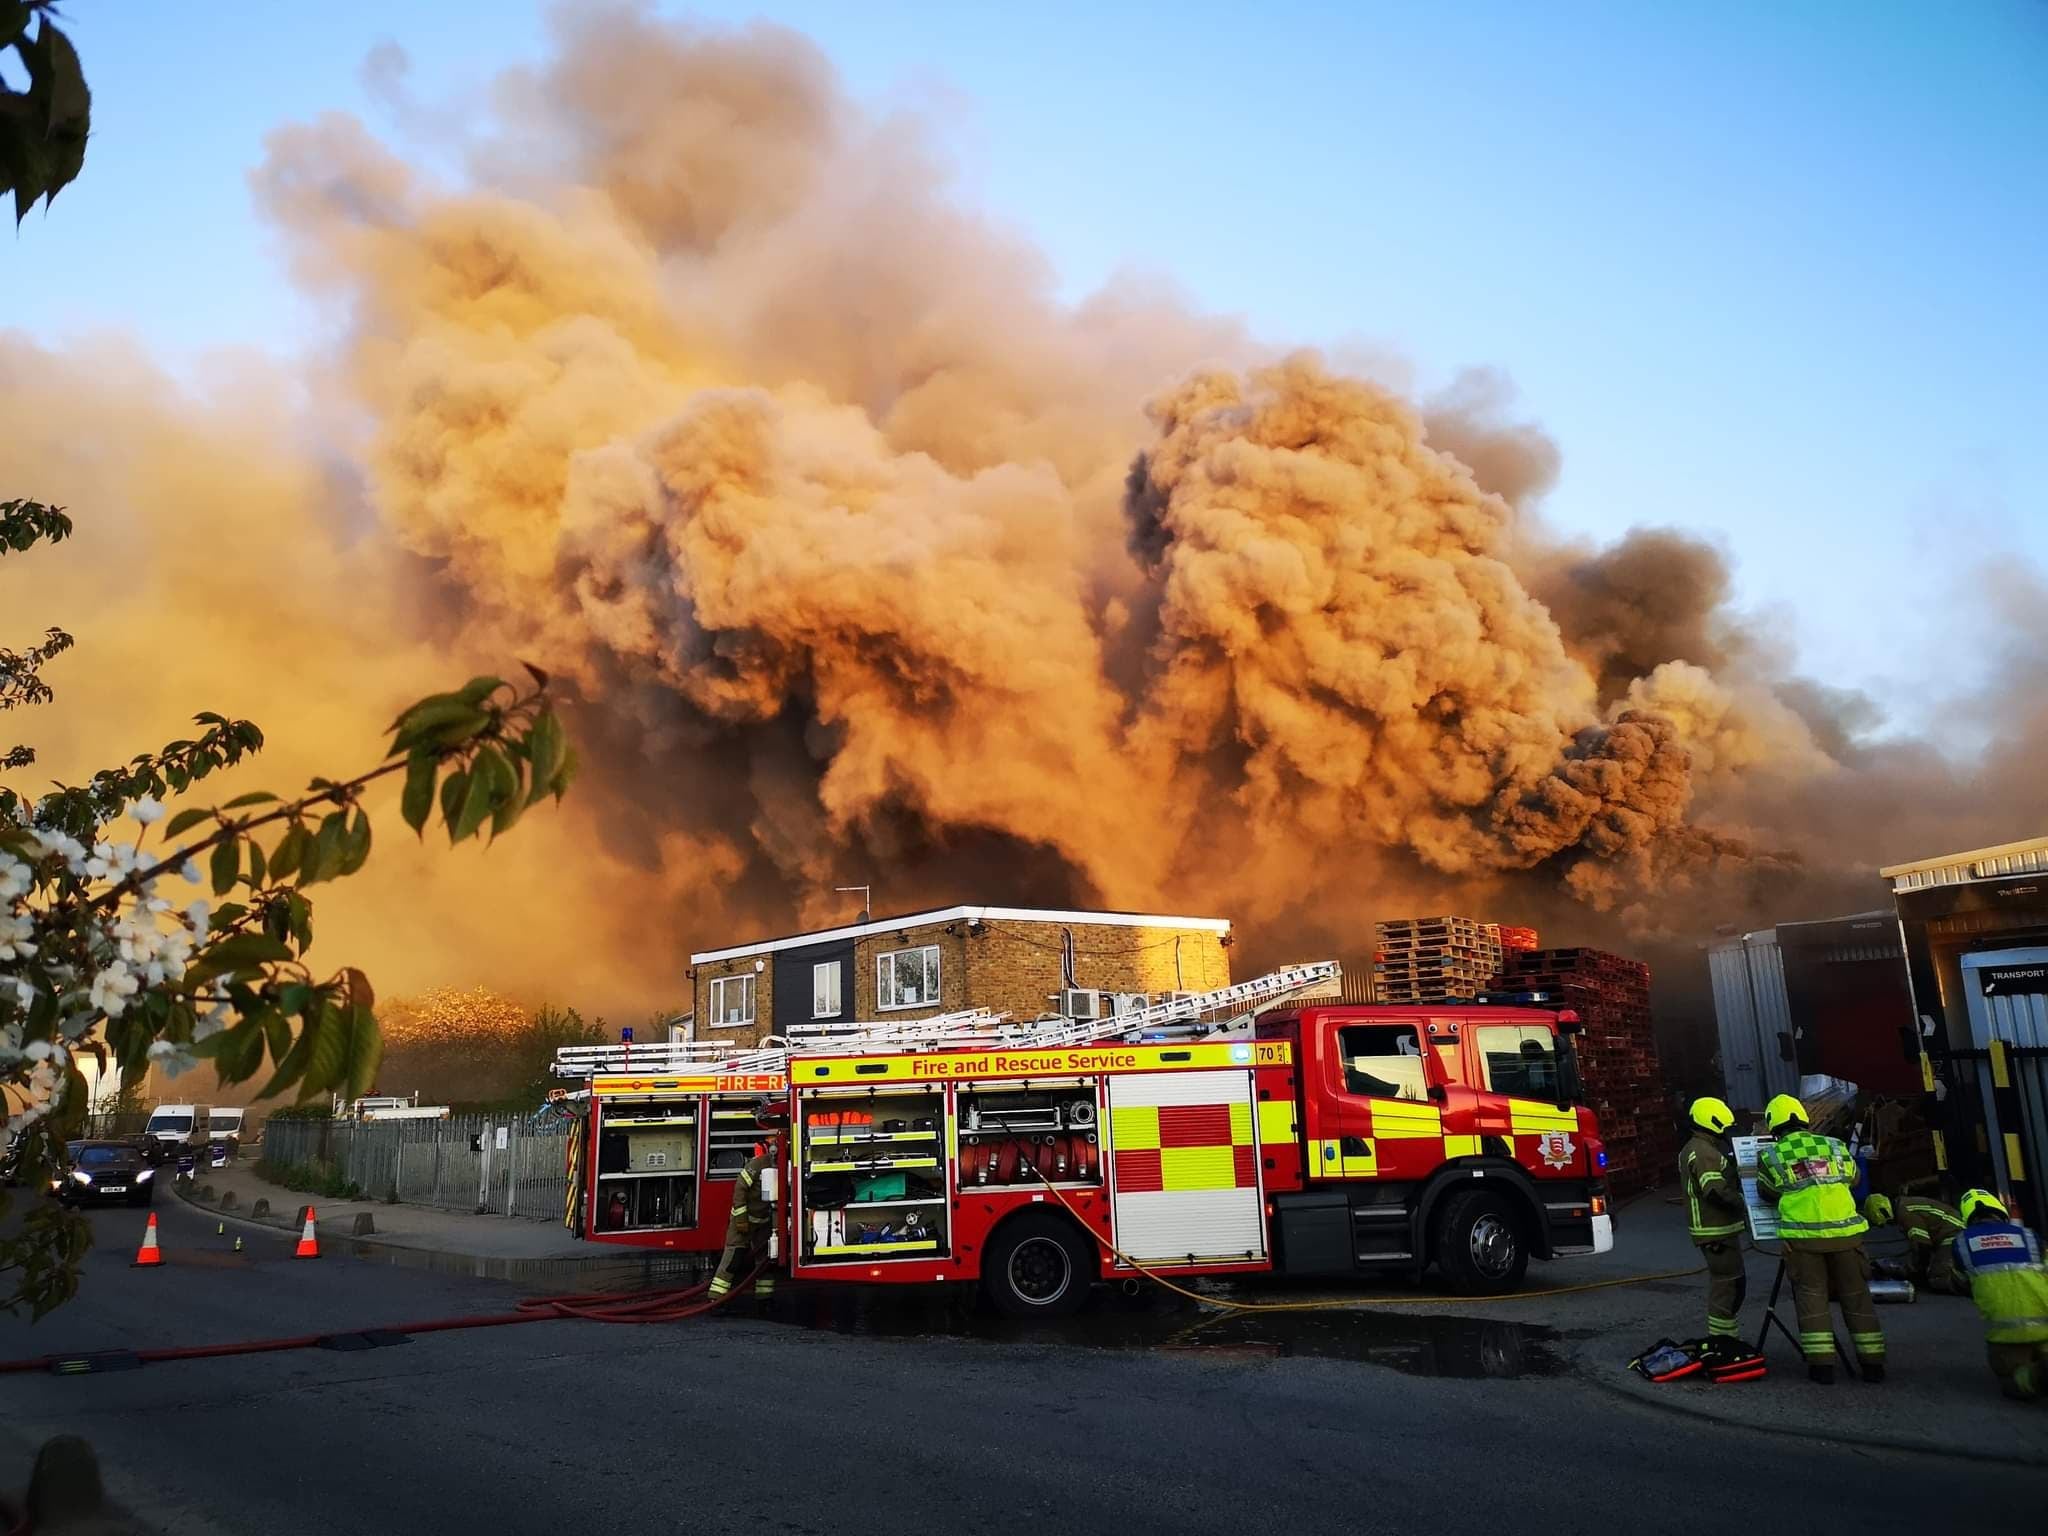 Firefighters were called to a fire in an industrial building on River Way